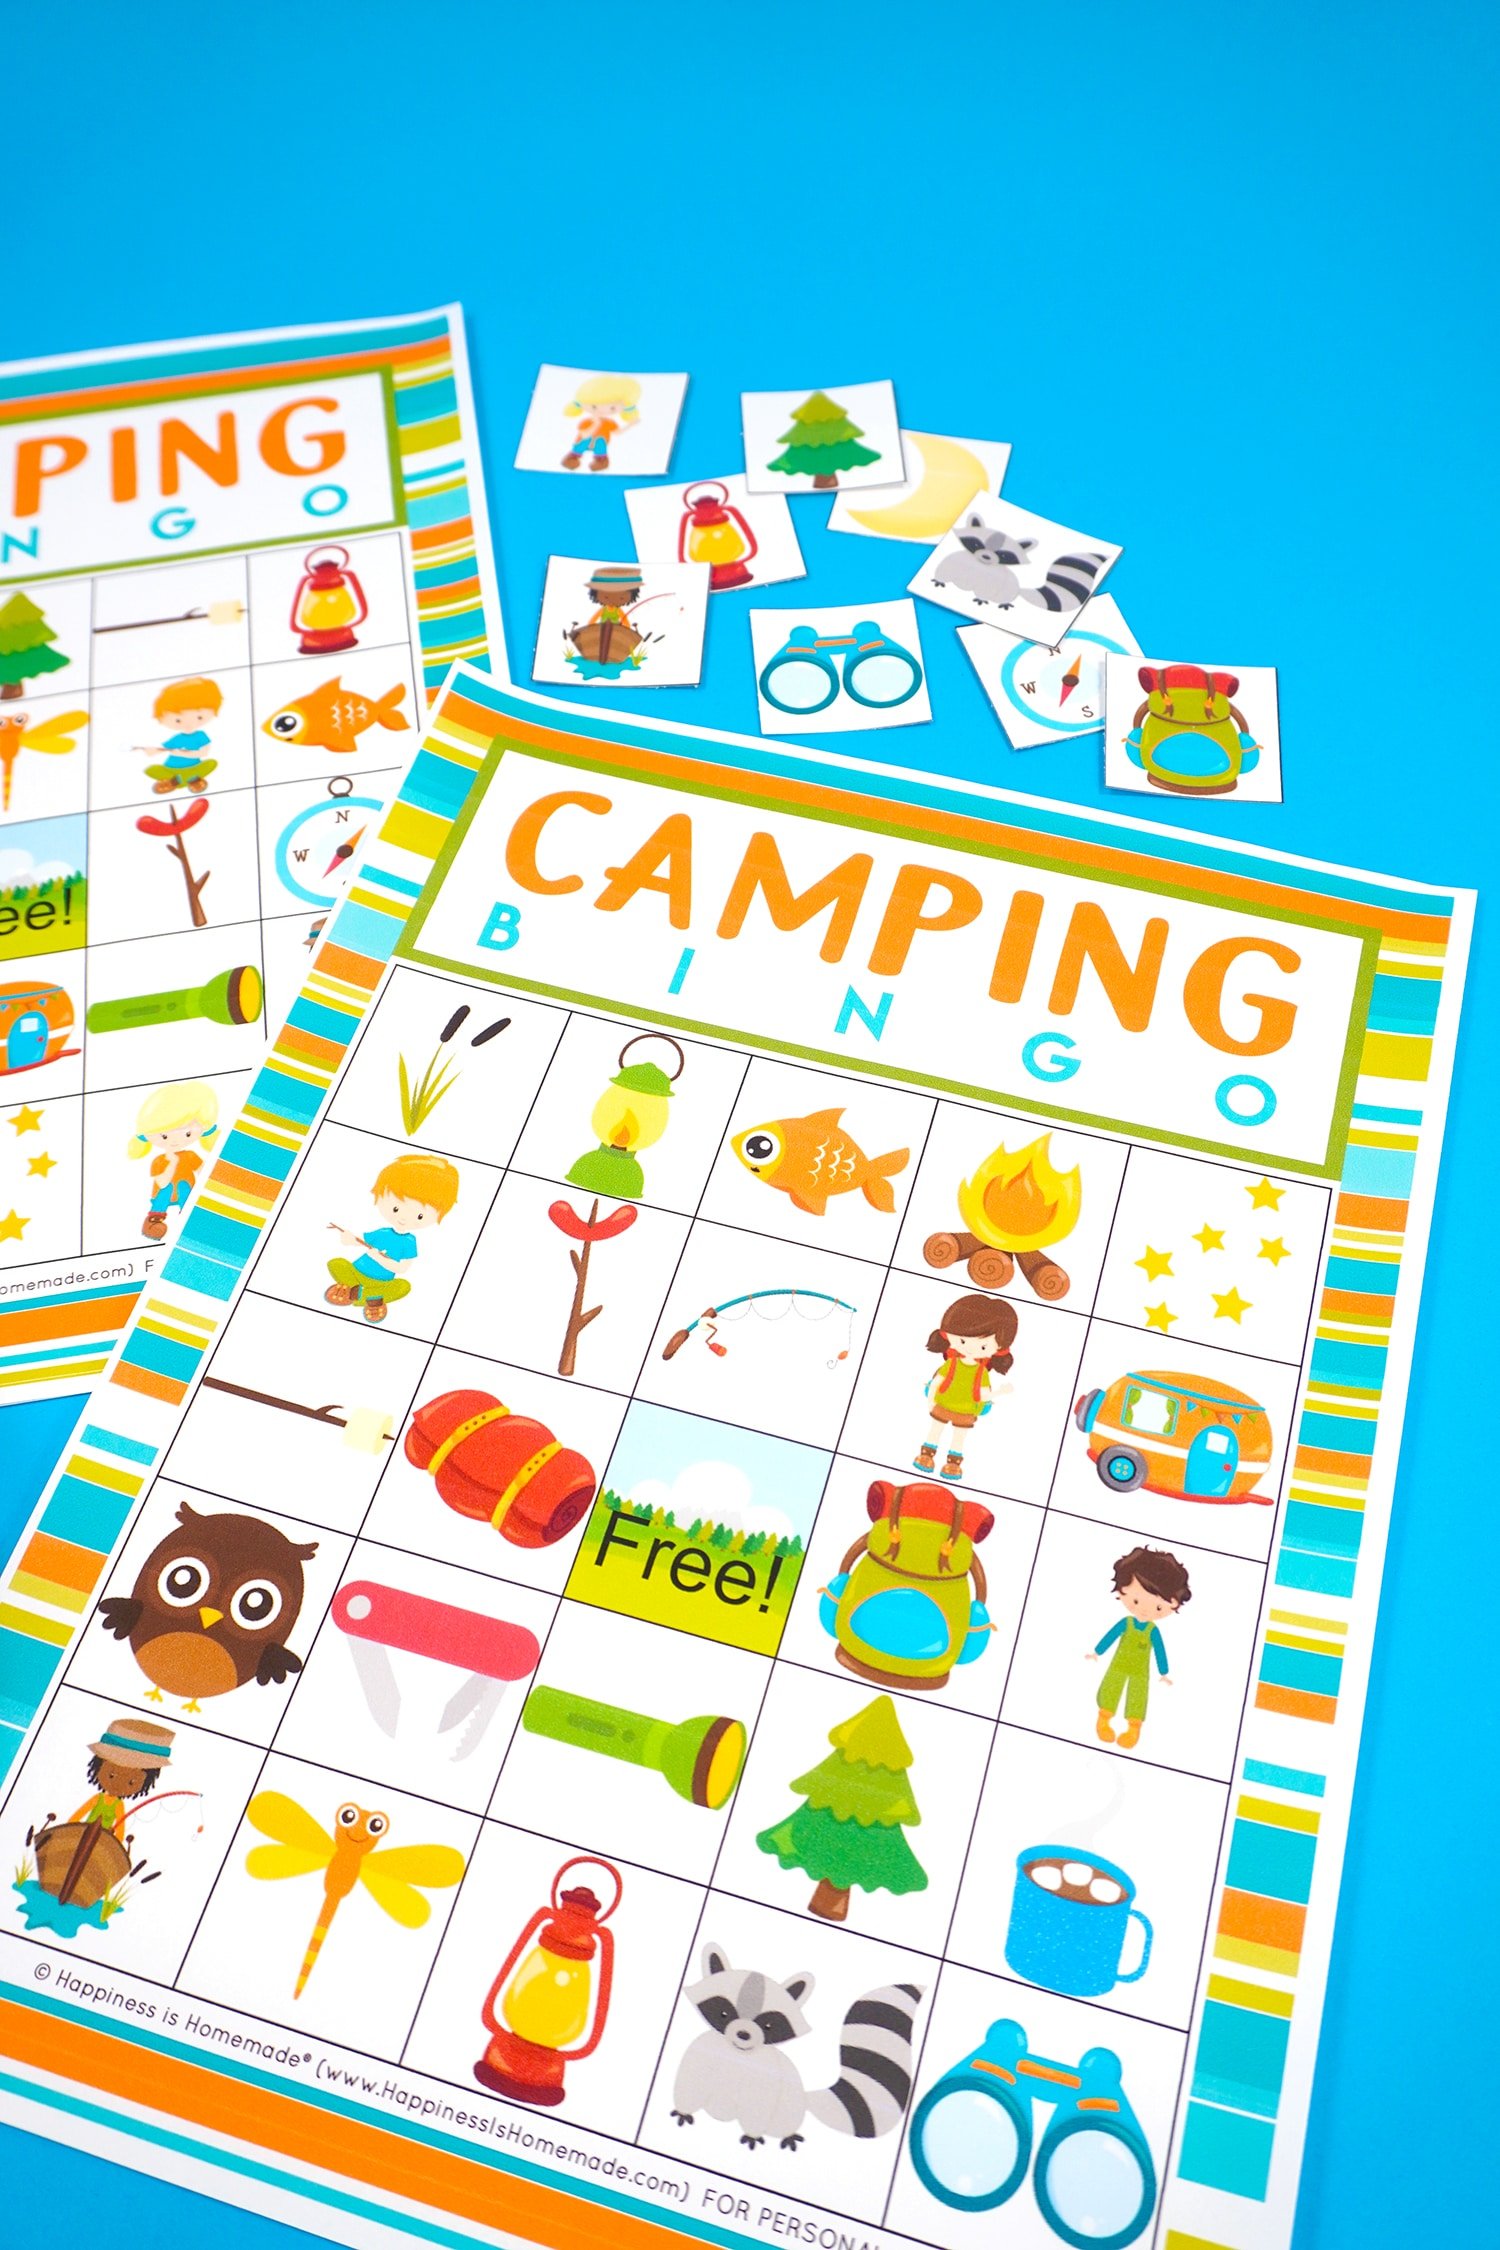 Two Camping Bingo Printable game cards on a blue background with scattered calling cards